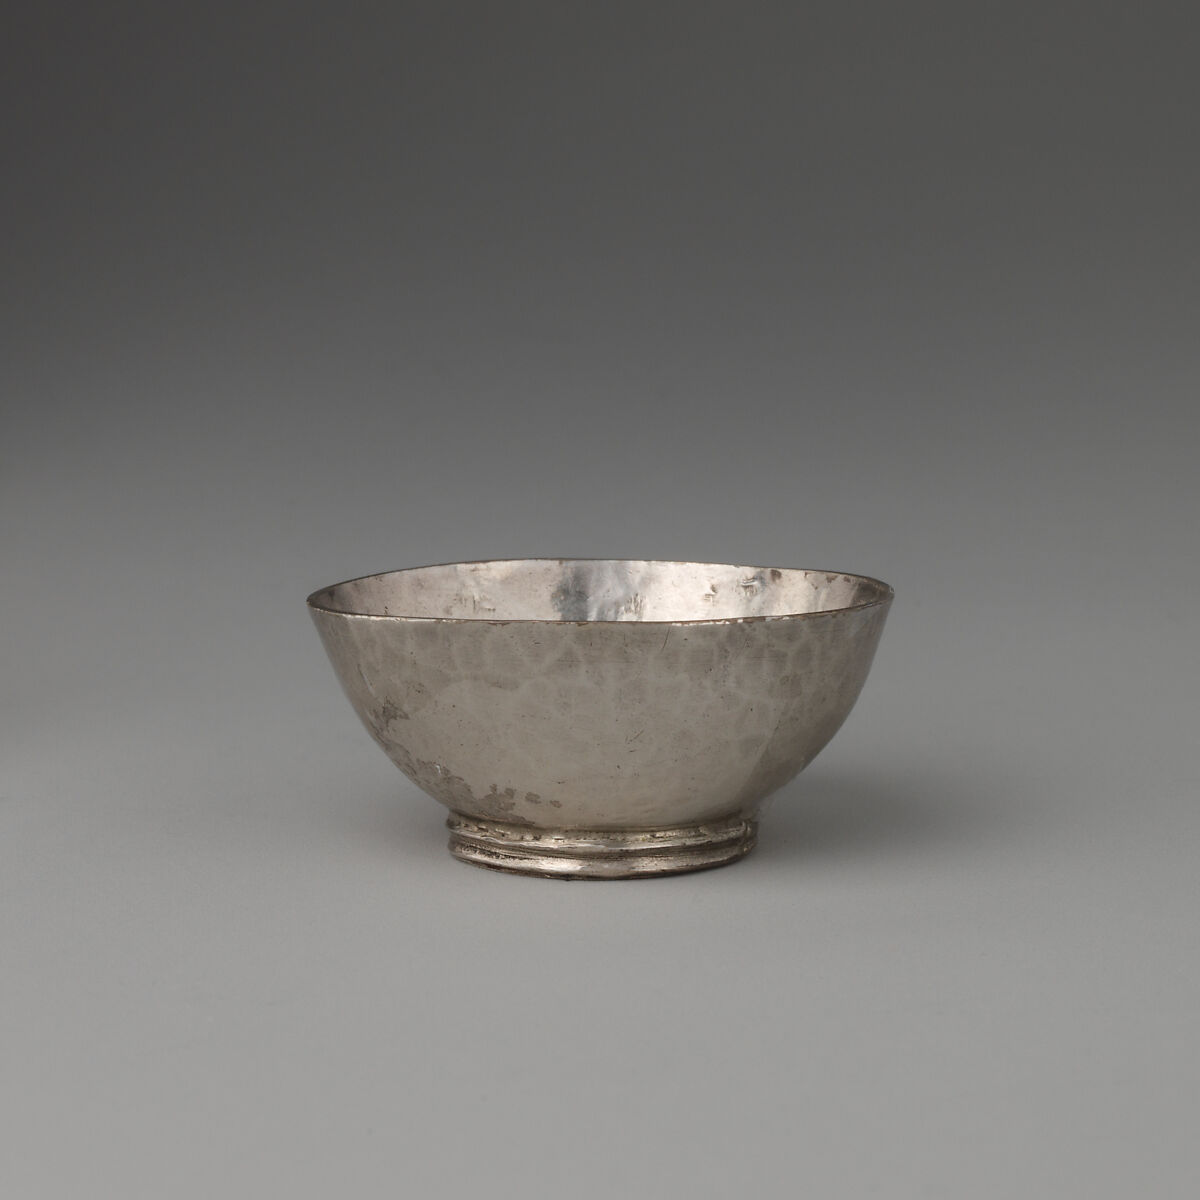 Miniature bowl, Probably by George Manjoy (British, active 1685–ca. 1720), Silver, British, London 